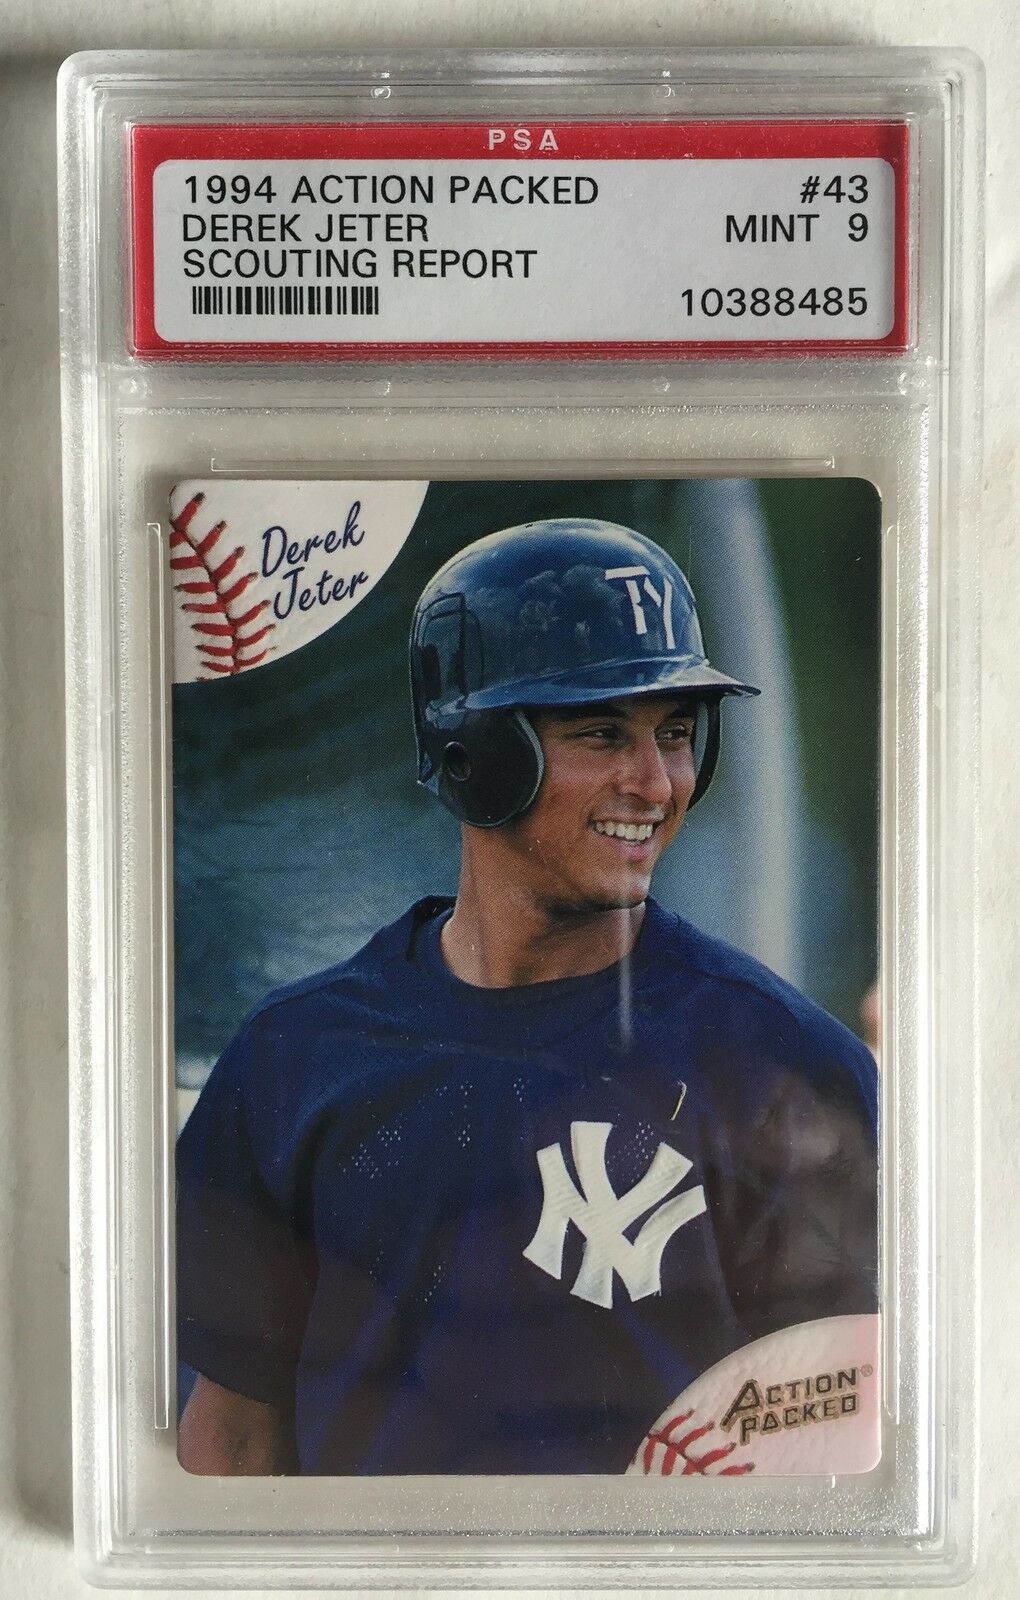 Derek Jeter RC 1994 Action Packed Scouting Report #43 Graded PSA Mint 9 Beauty